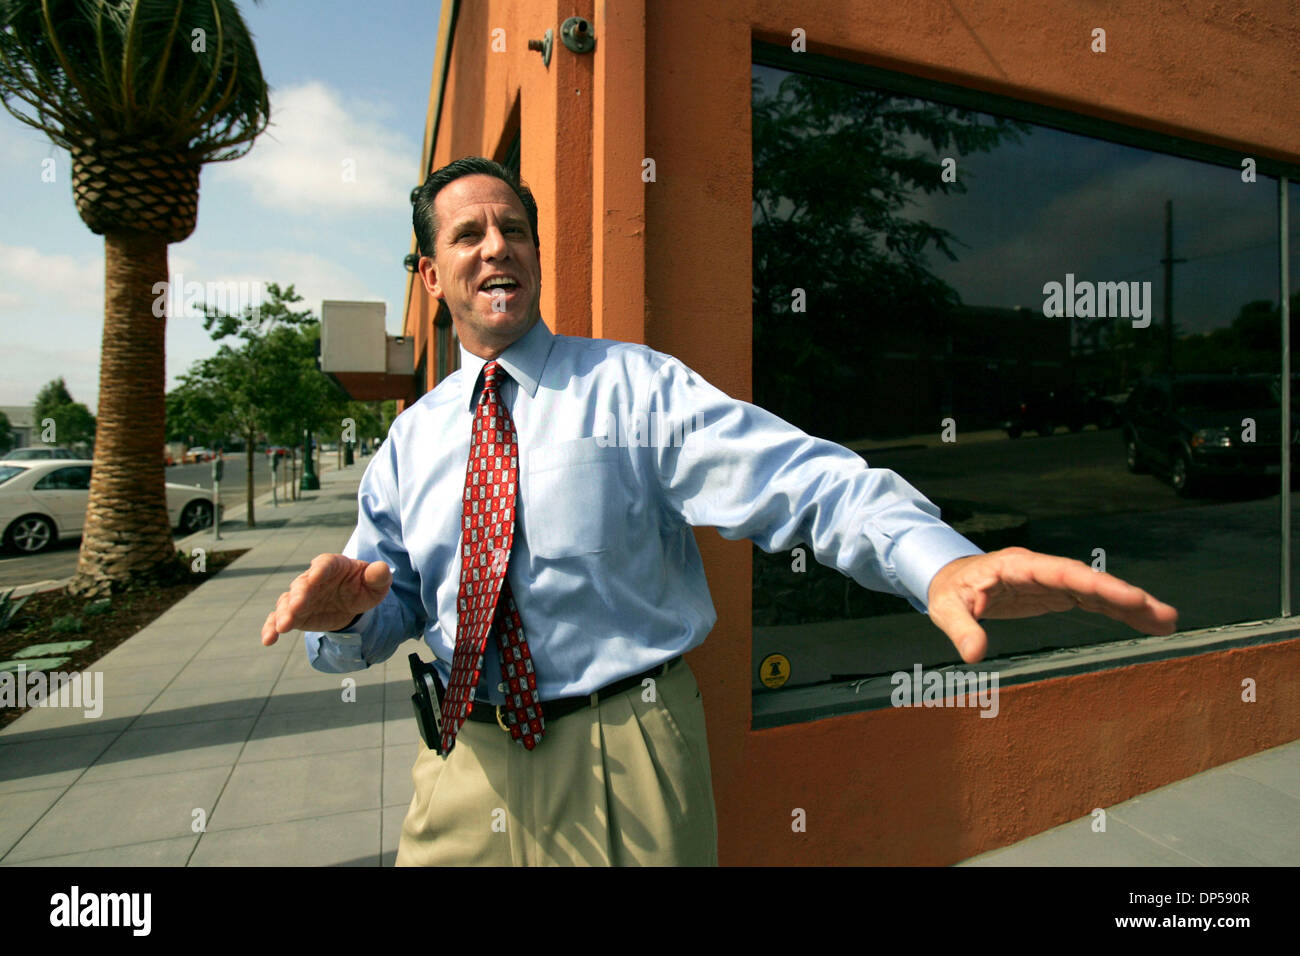 Sep 07, 2006; San Diego, CA, USA; DAVID PECKINPAUGH, president and CEO of  the San Diego Convention and Visitors Bureau, jokes with passerbys in front  of the bureau's new accommodations on India